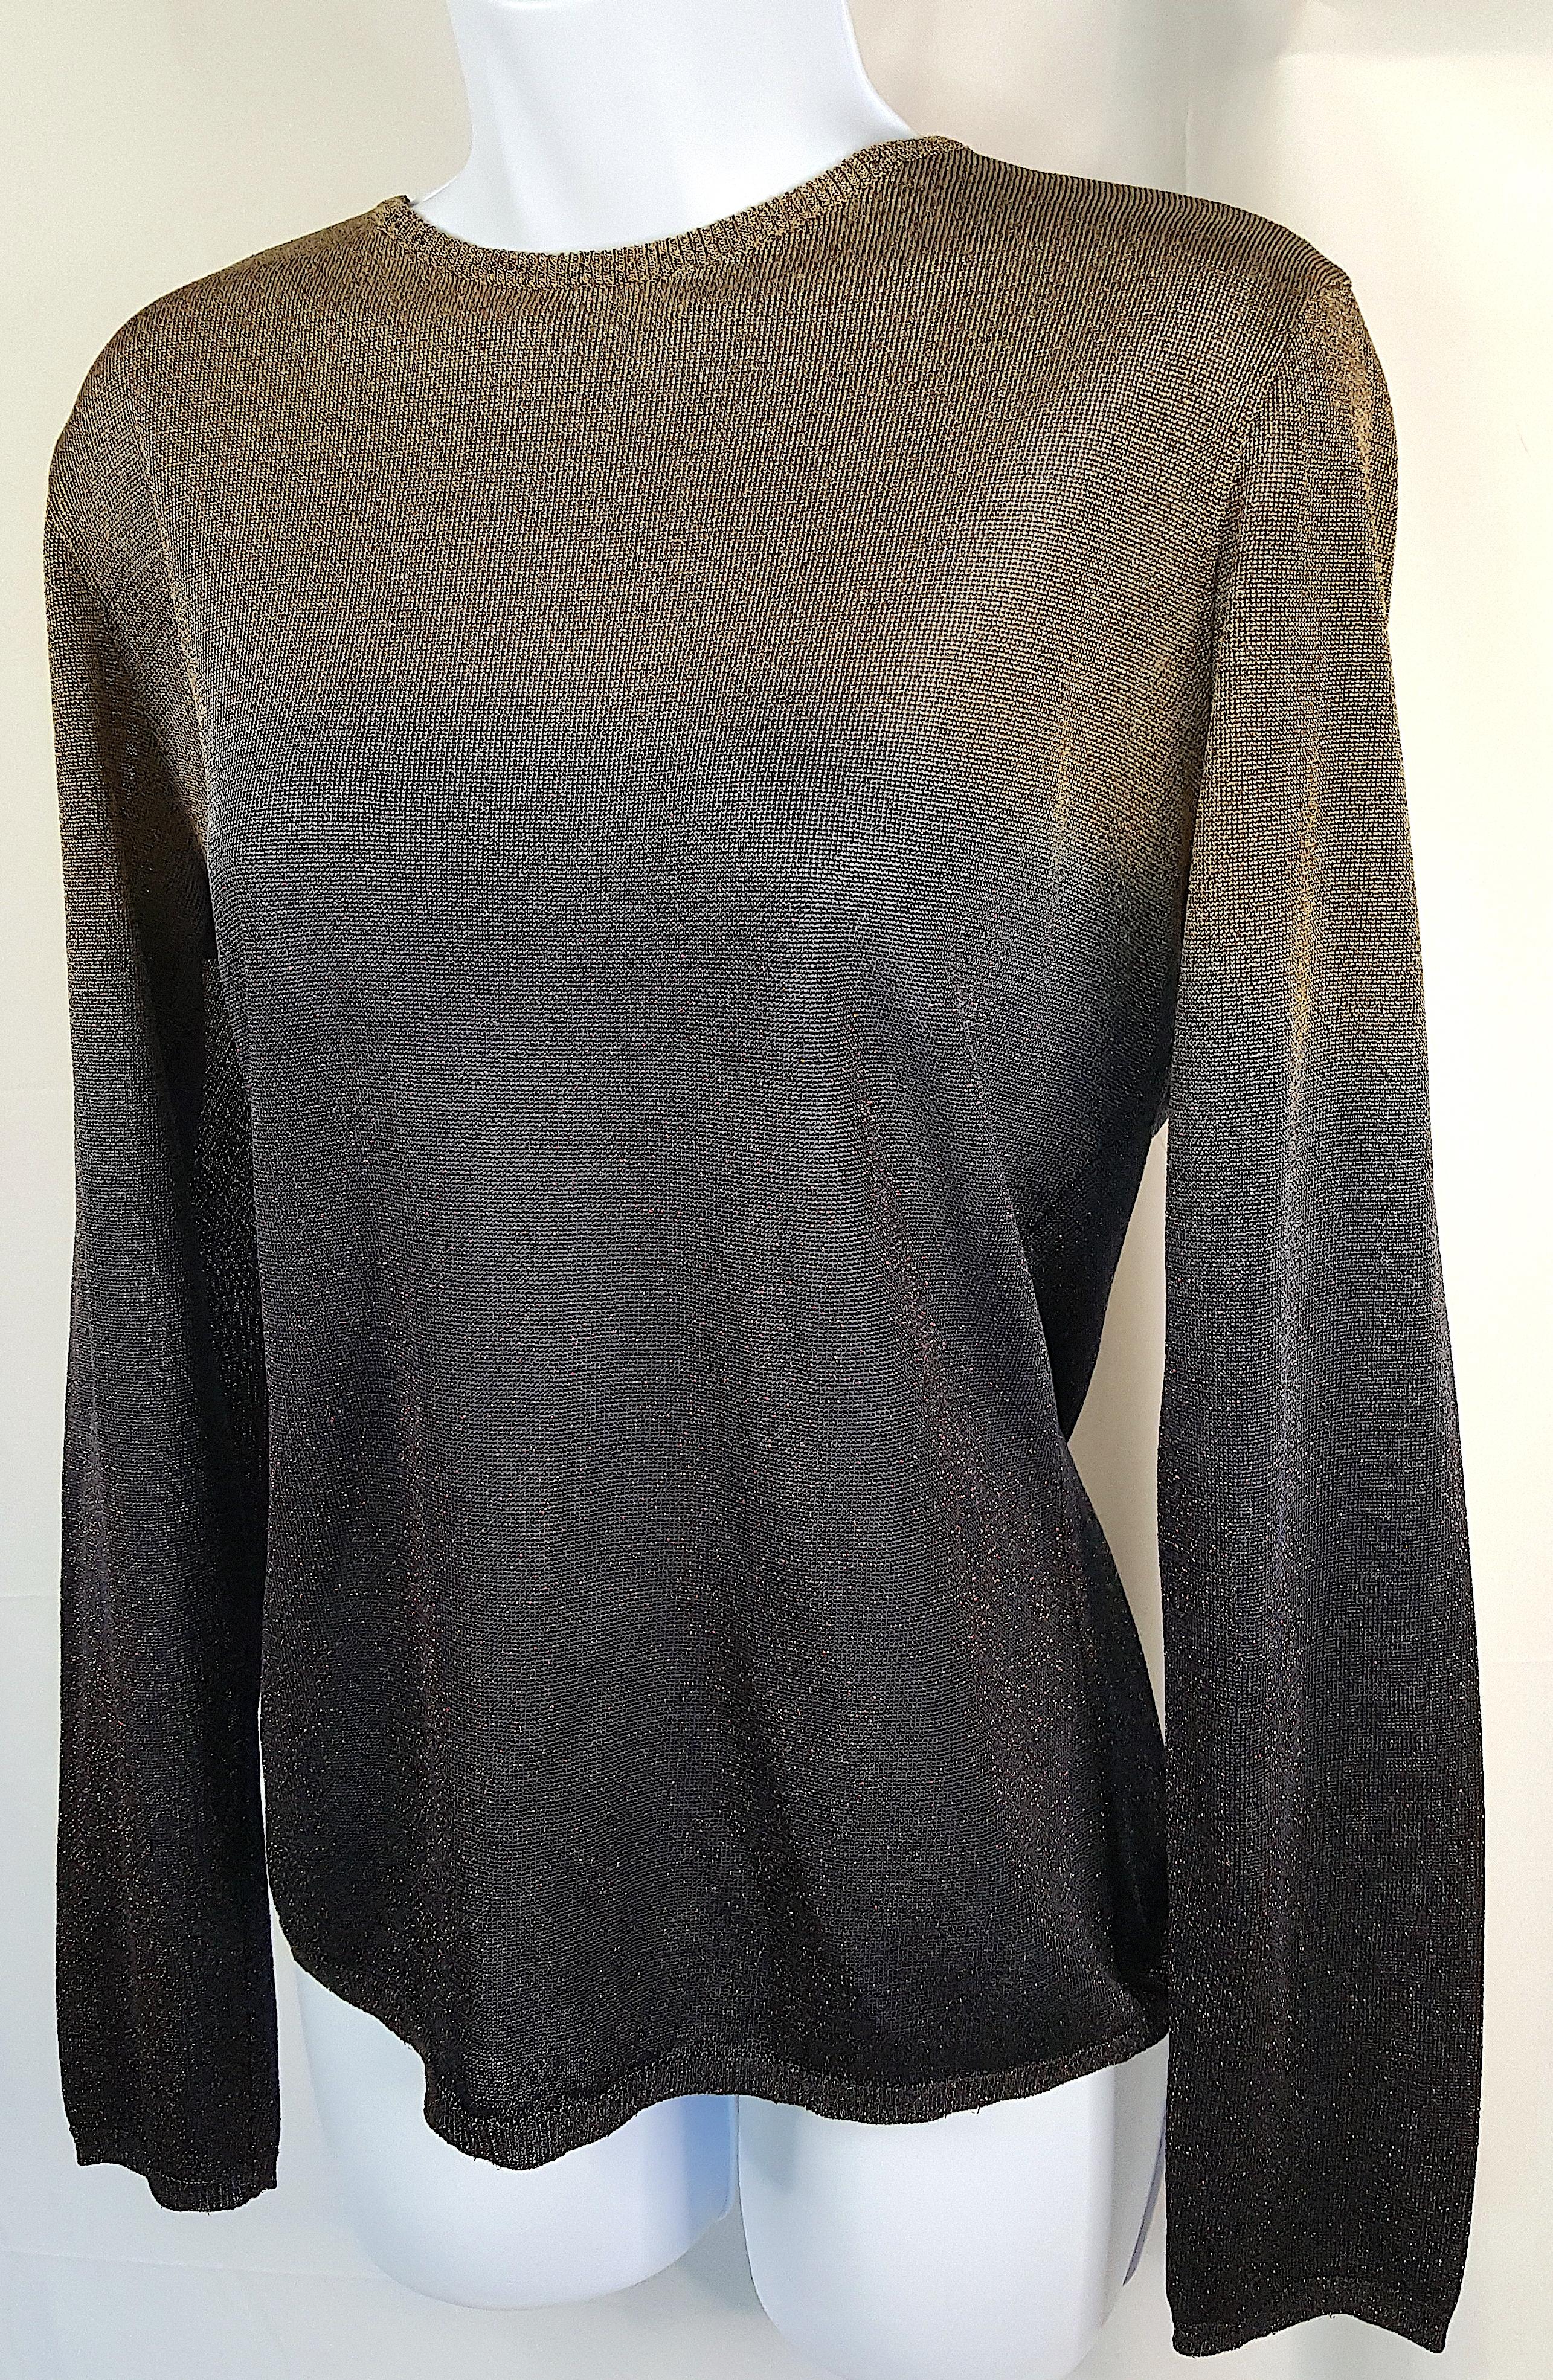 MartinMargiela 1990s MissDeannaKnit GoldLurexThreaded FauxDipDyed Ombre Pullover In Good Condition For Sale In Chicago, IL